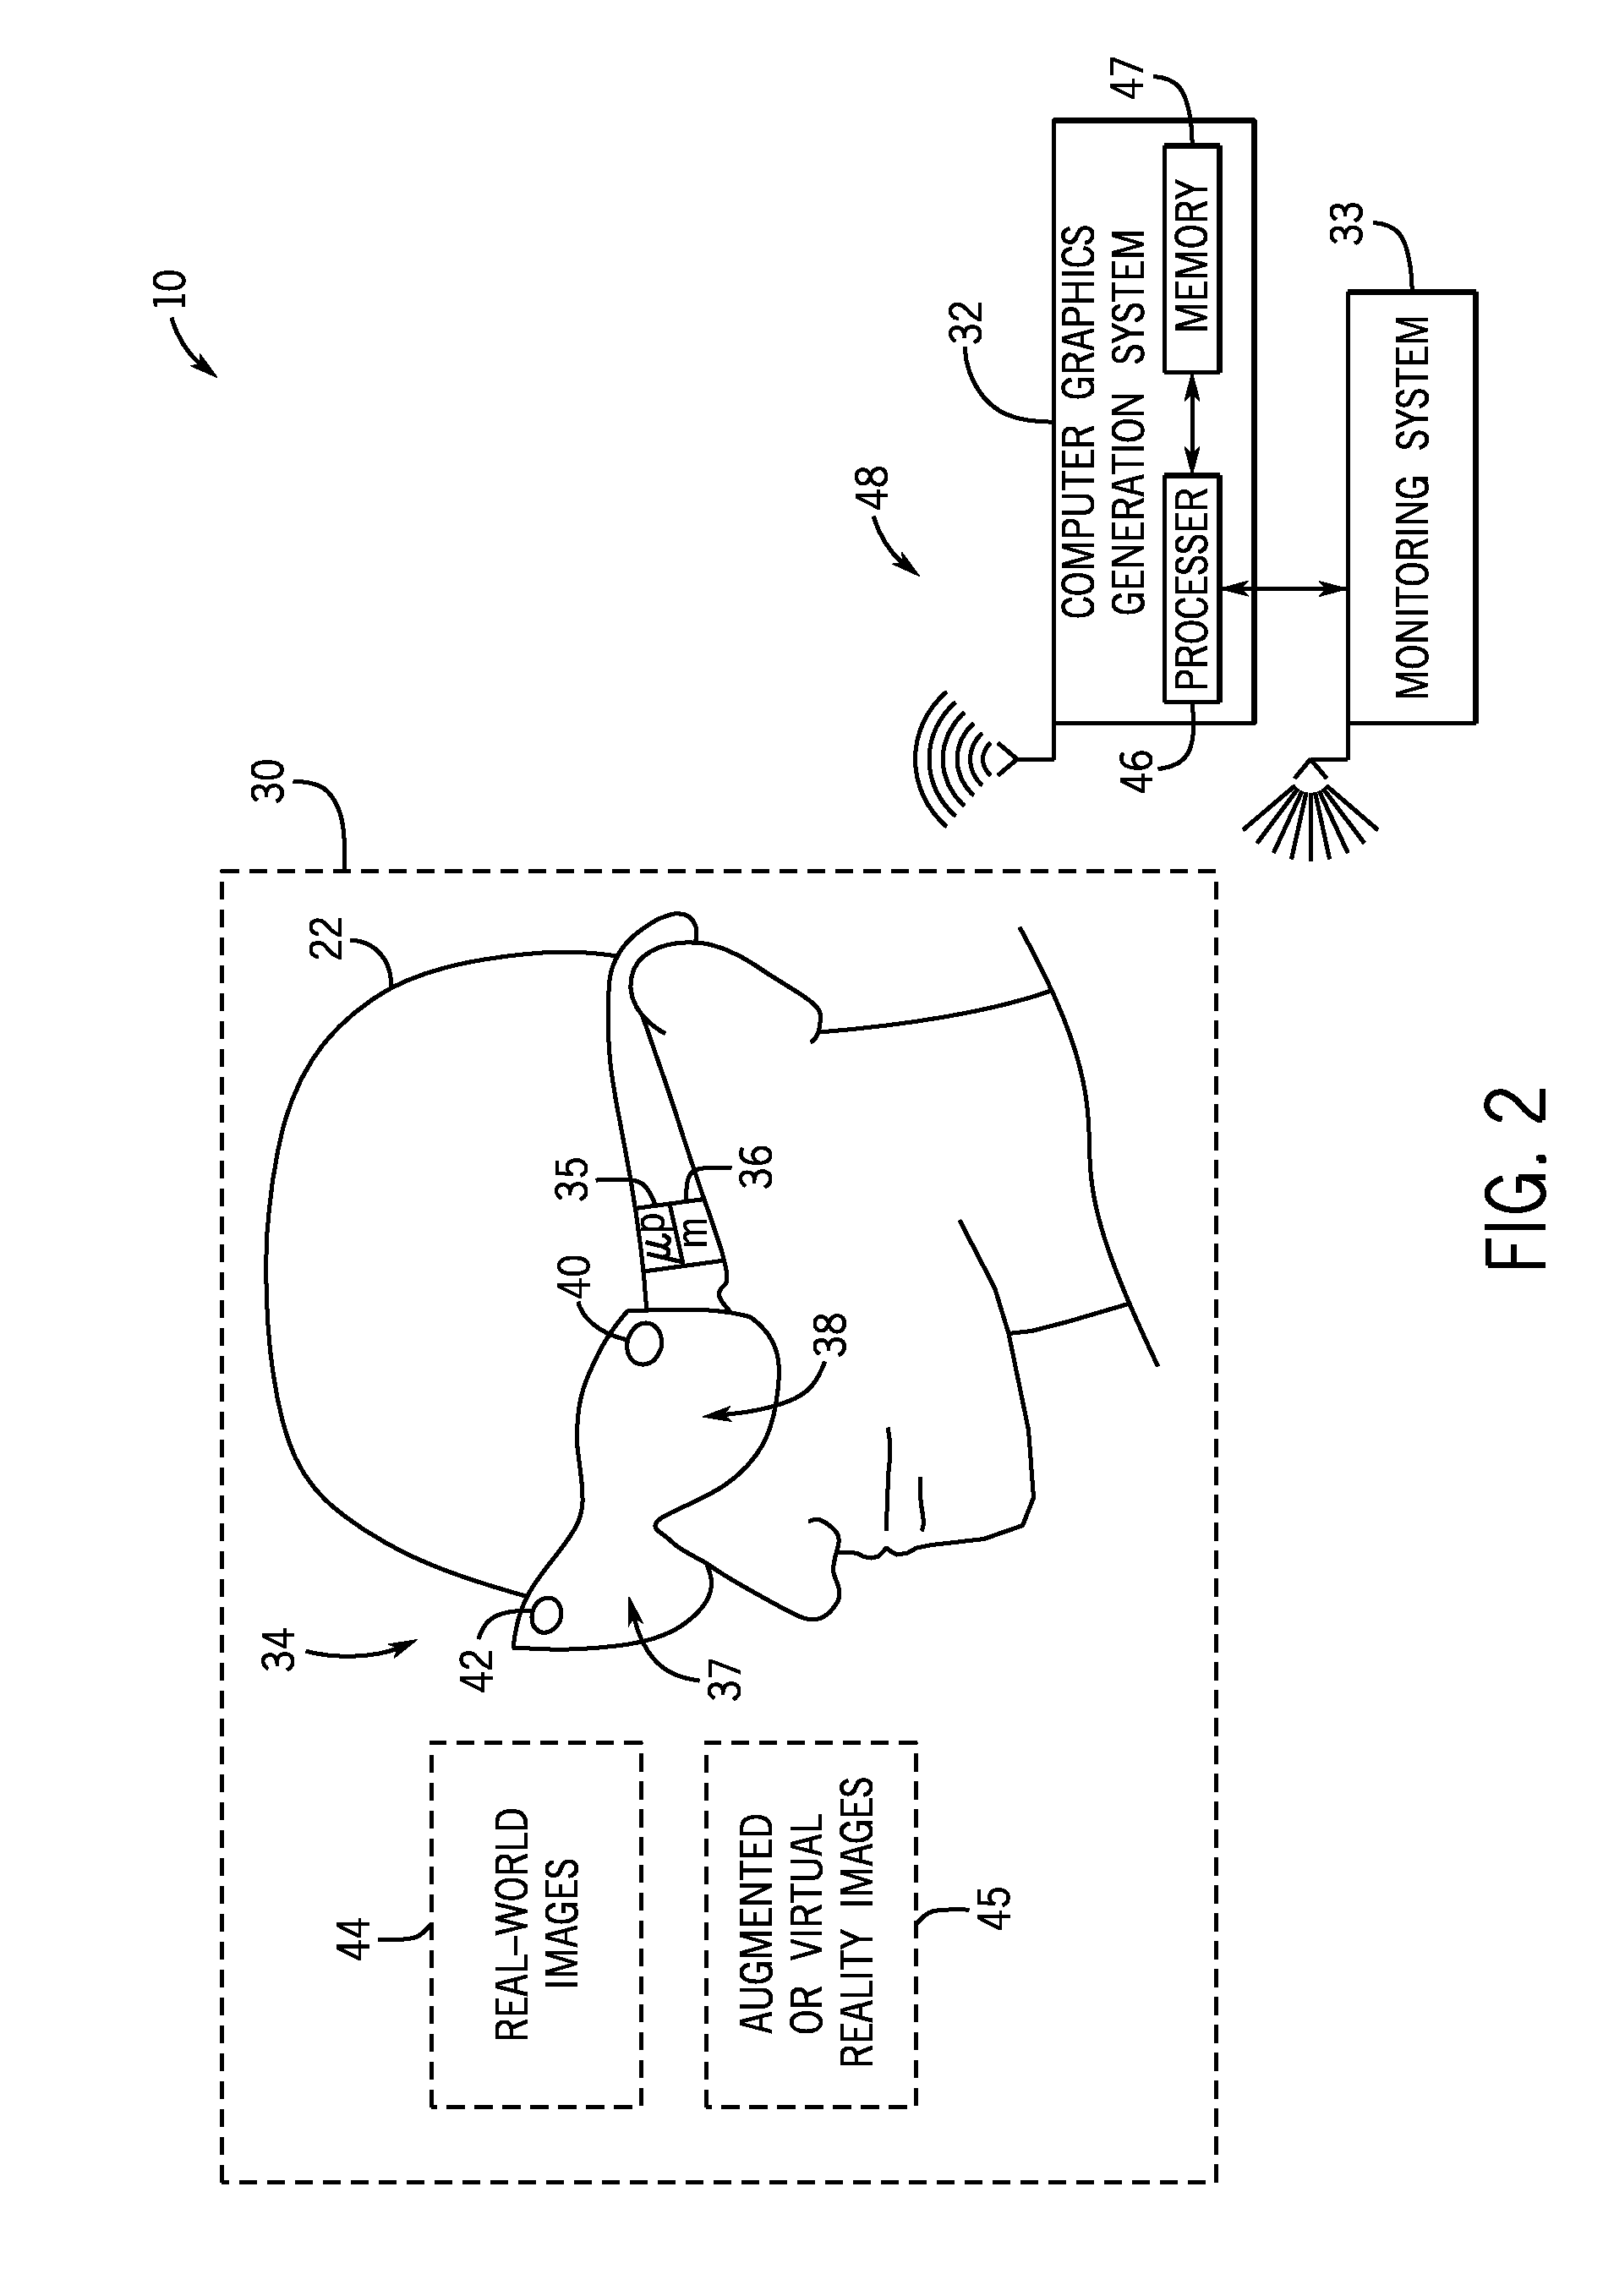 Systems and methods for generating augmented and virtual reality images